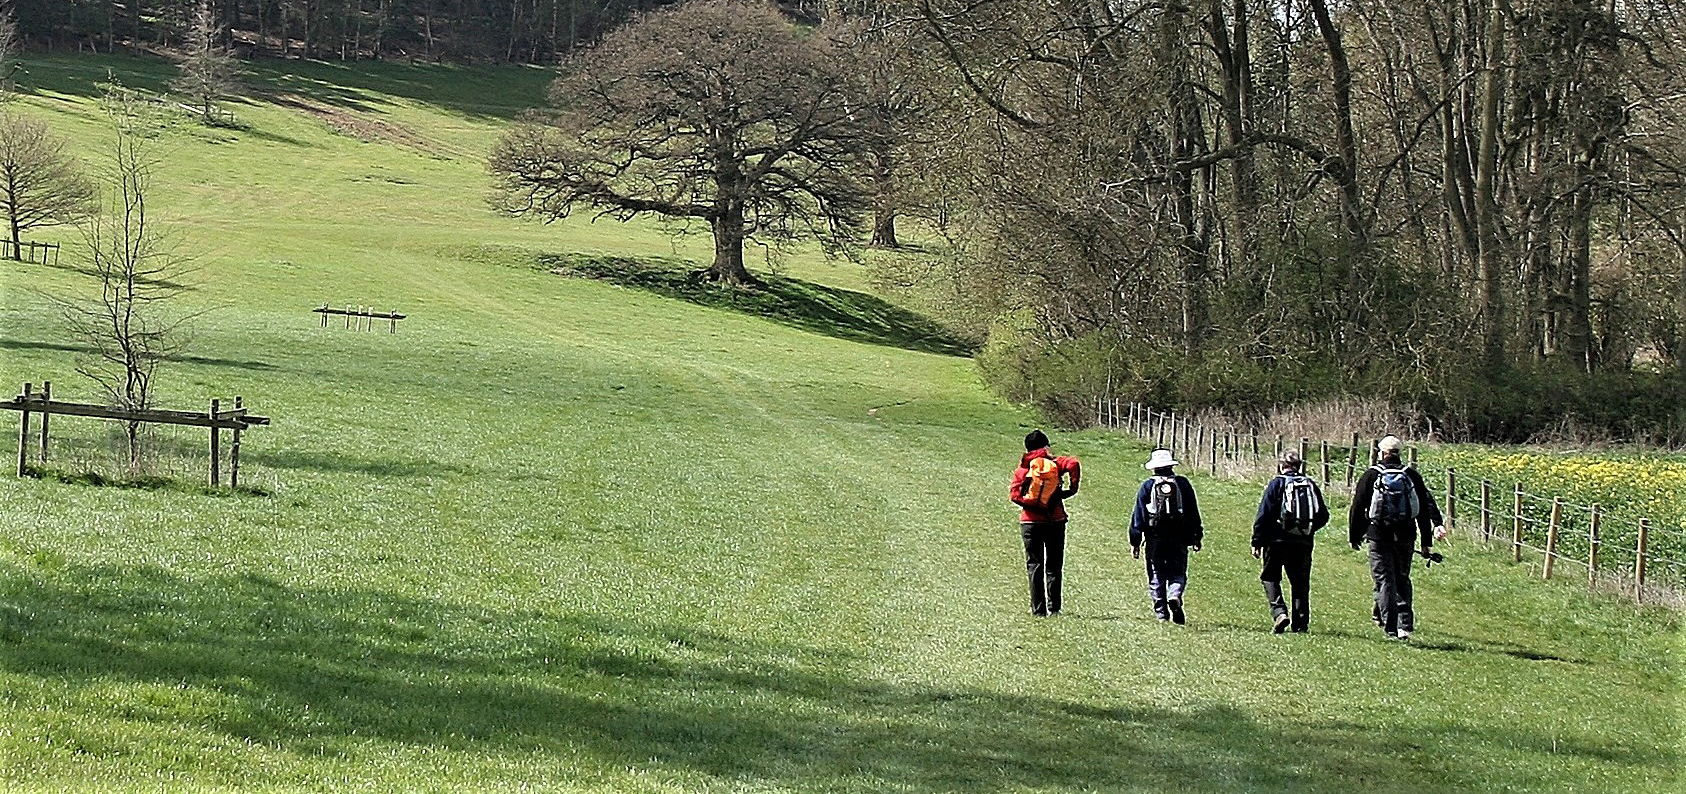 four walkers in a lush green grassy meadow with trees just coming into leaf in the springtime